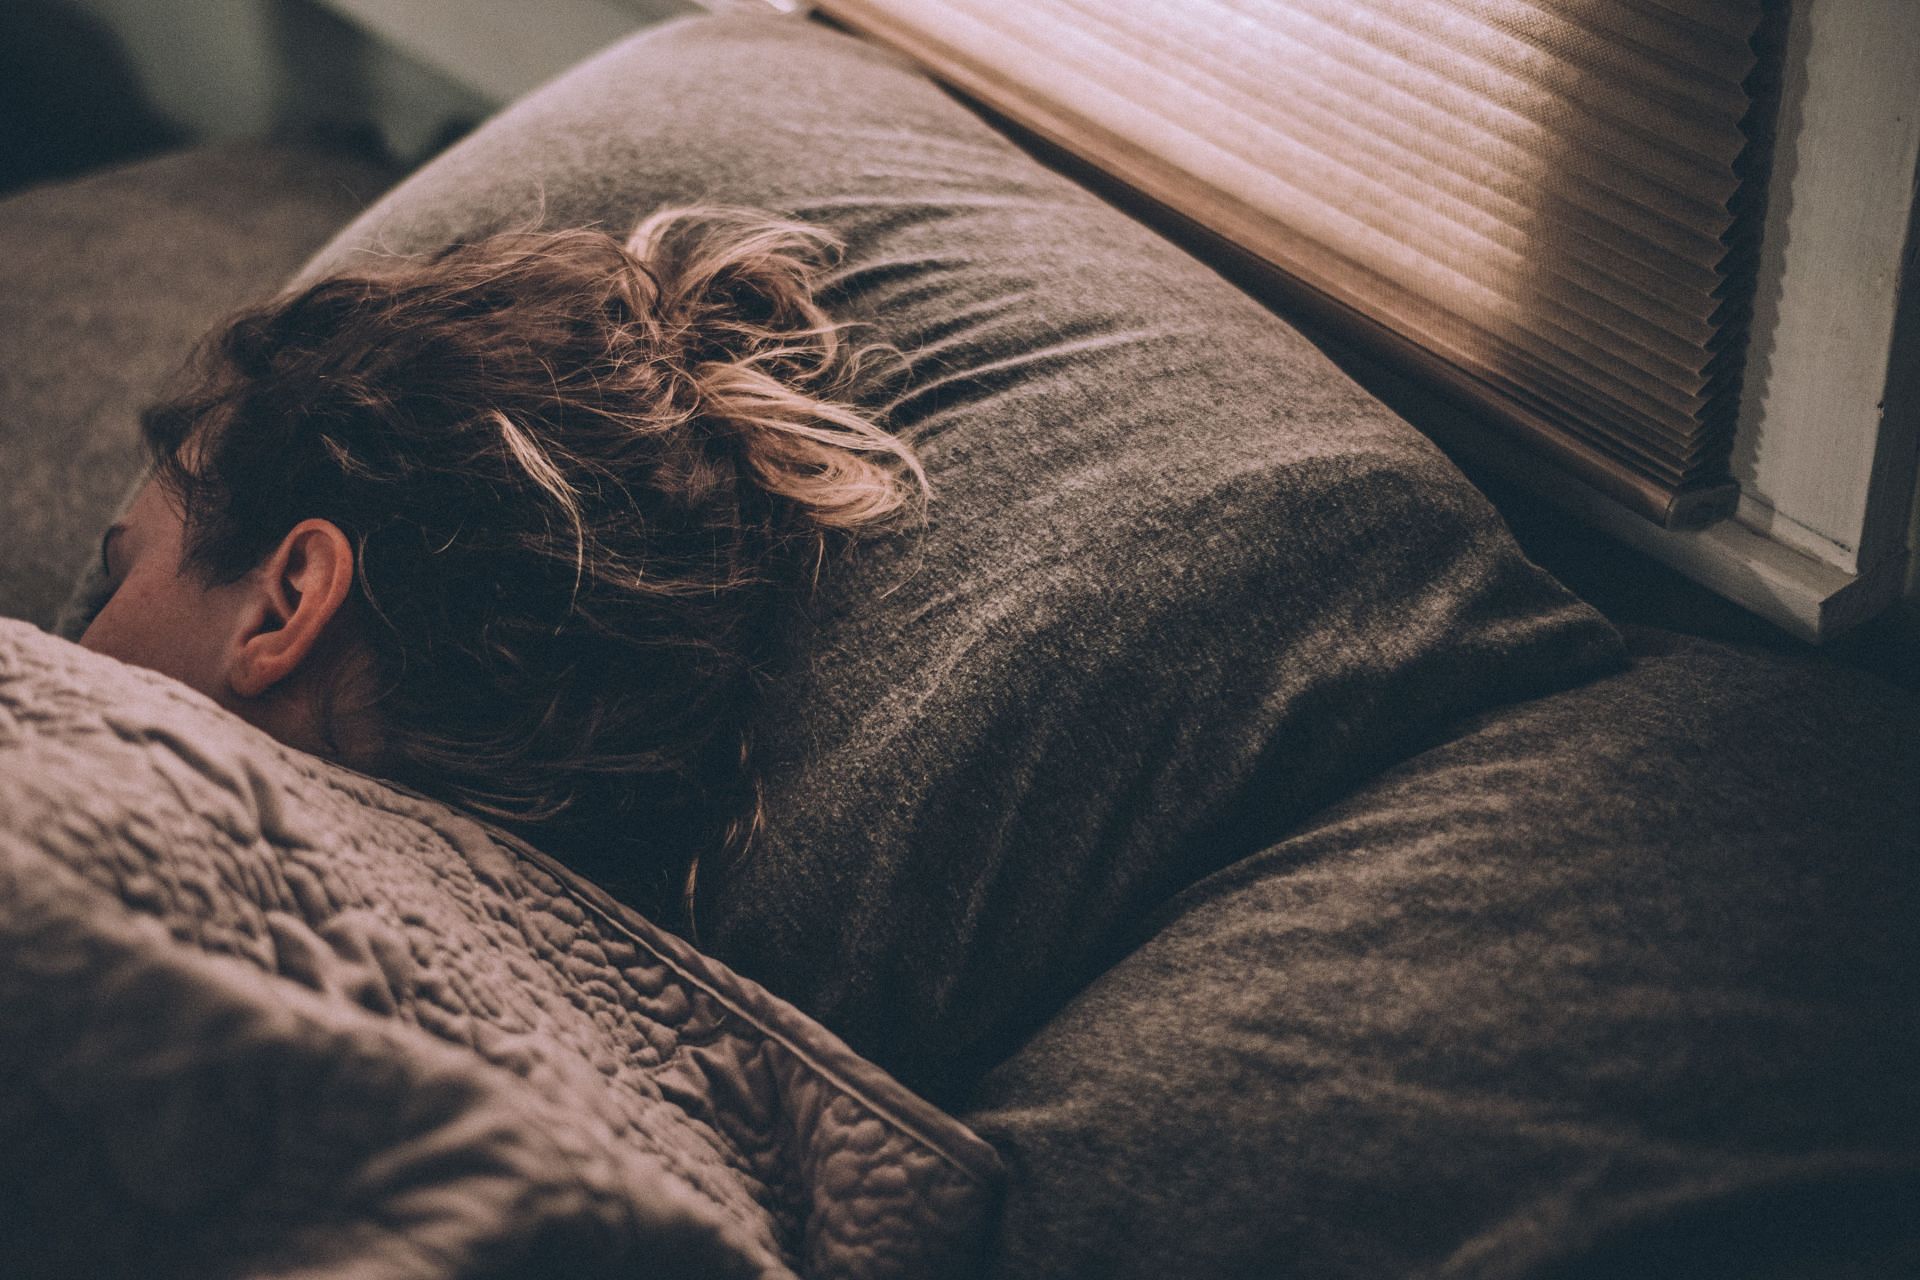 Getting 7-8 hours everyday sleep keeps your immune function strong. (Image via Unsplash / Lux Graves)